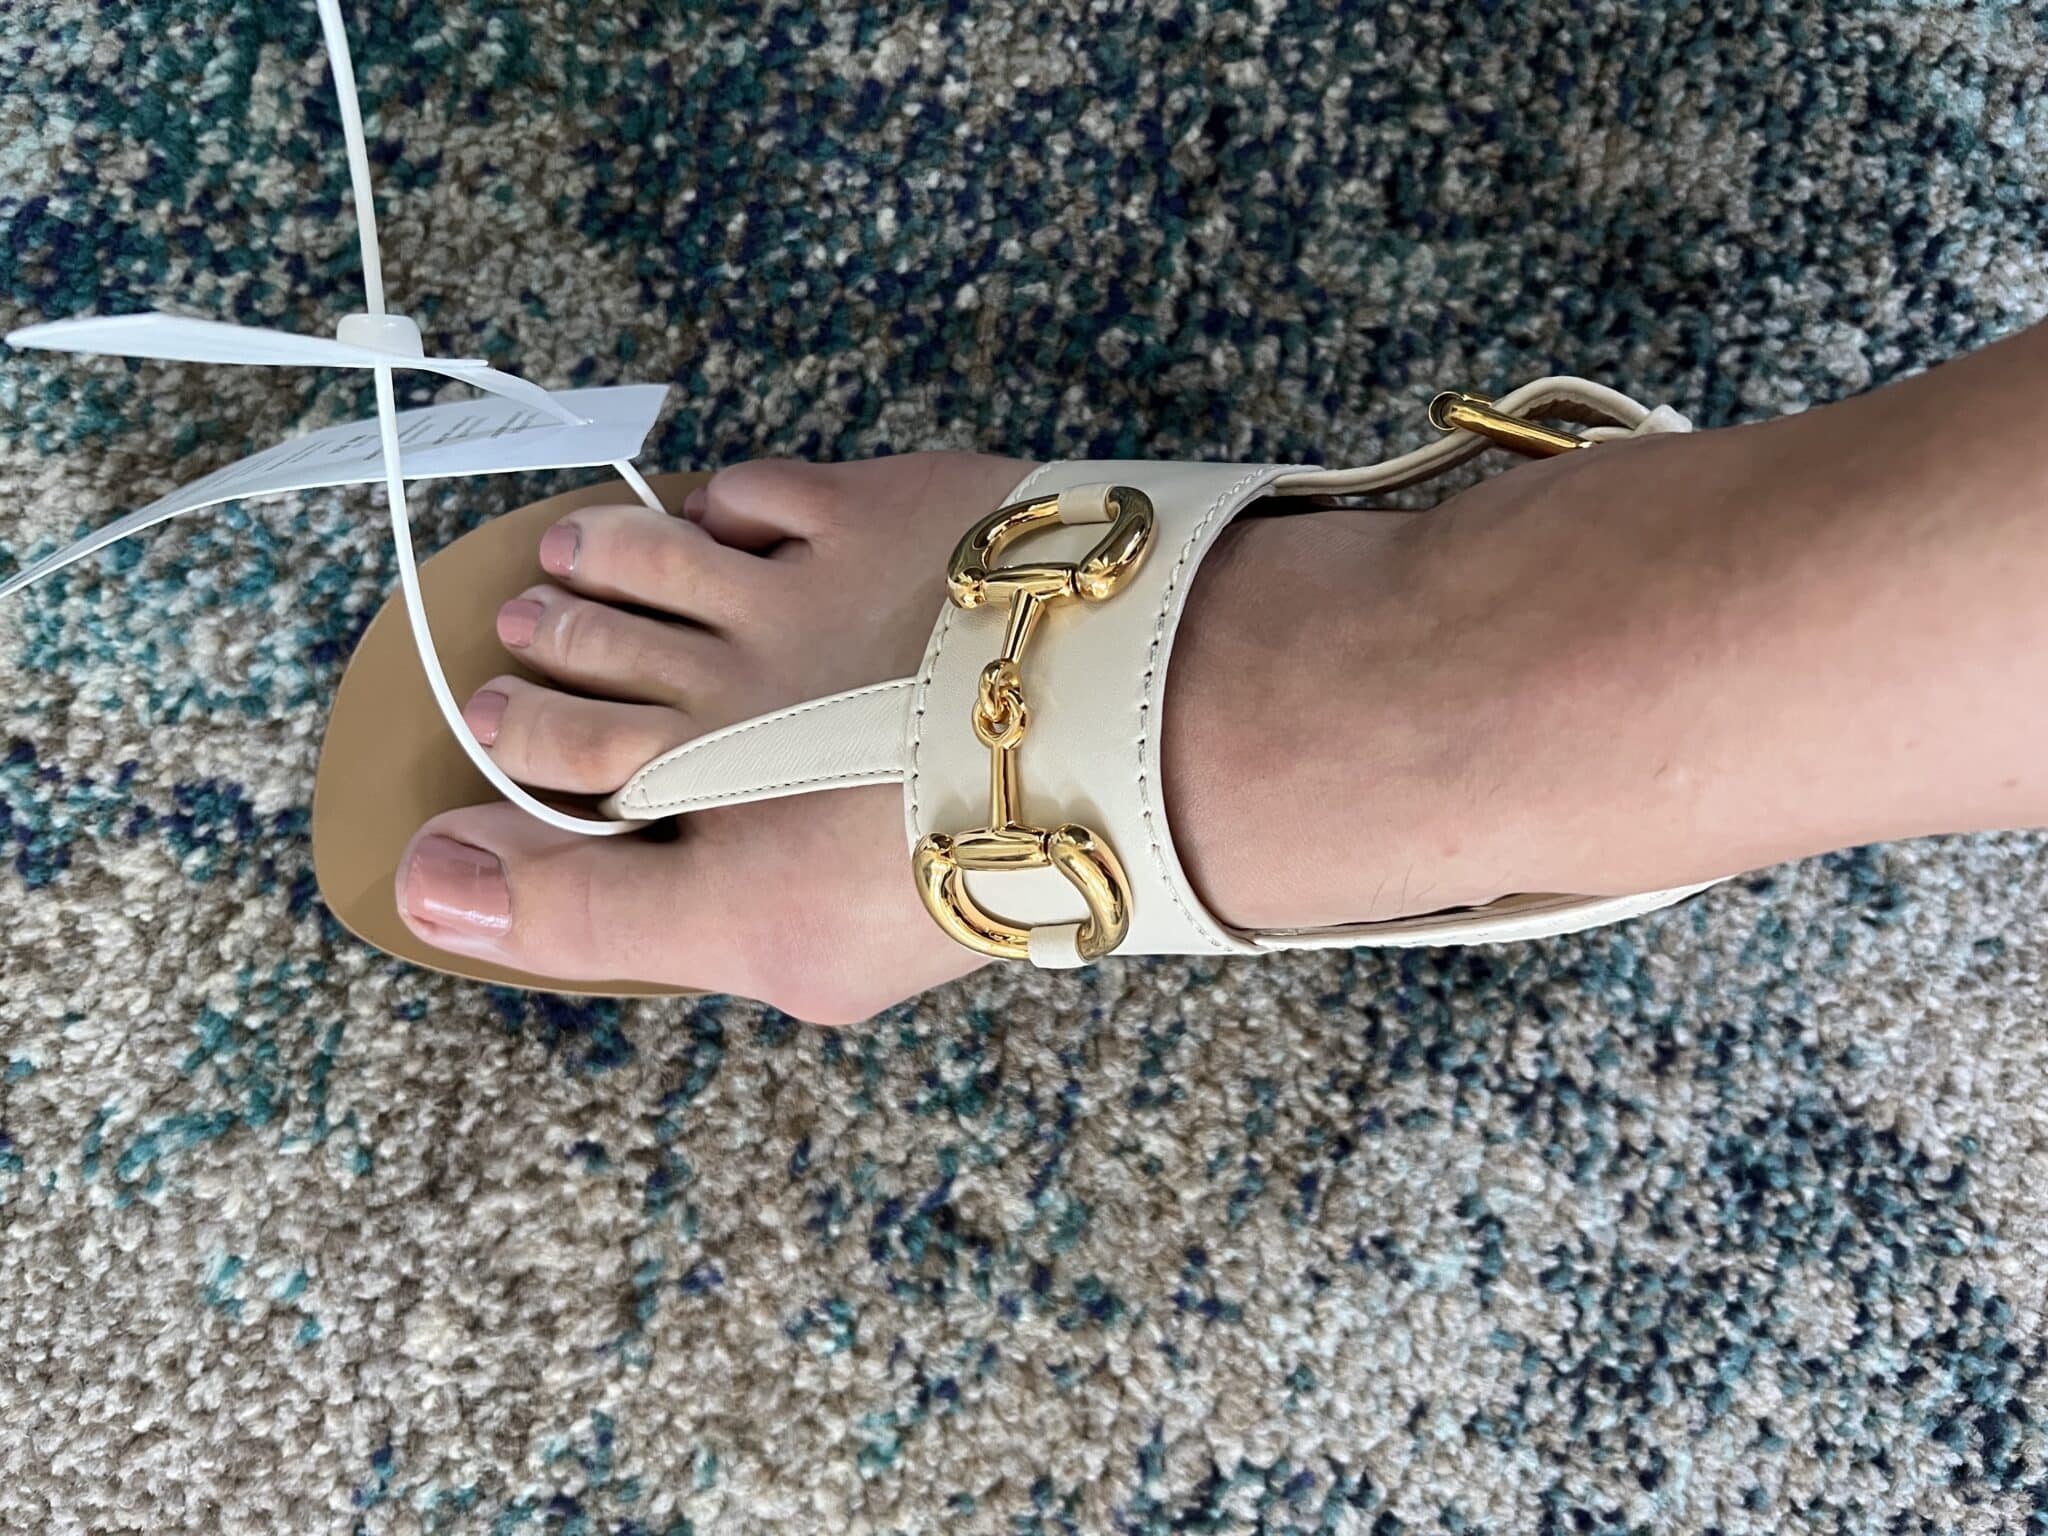 Gucci sandals sizing review and fit